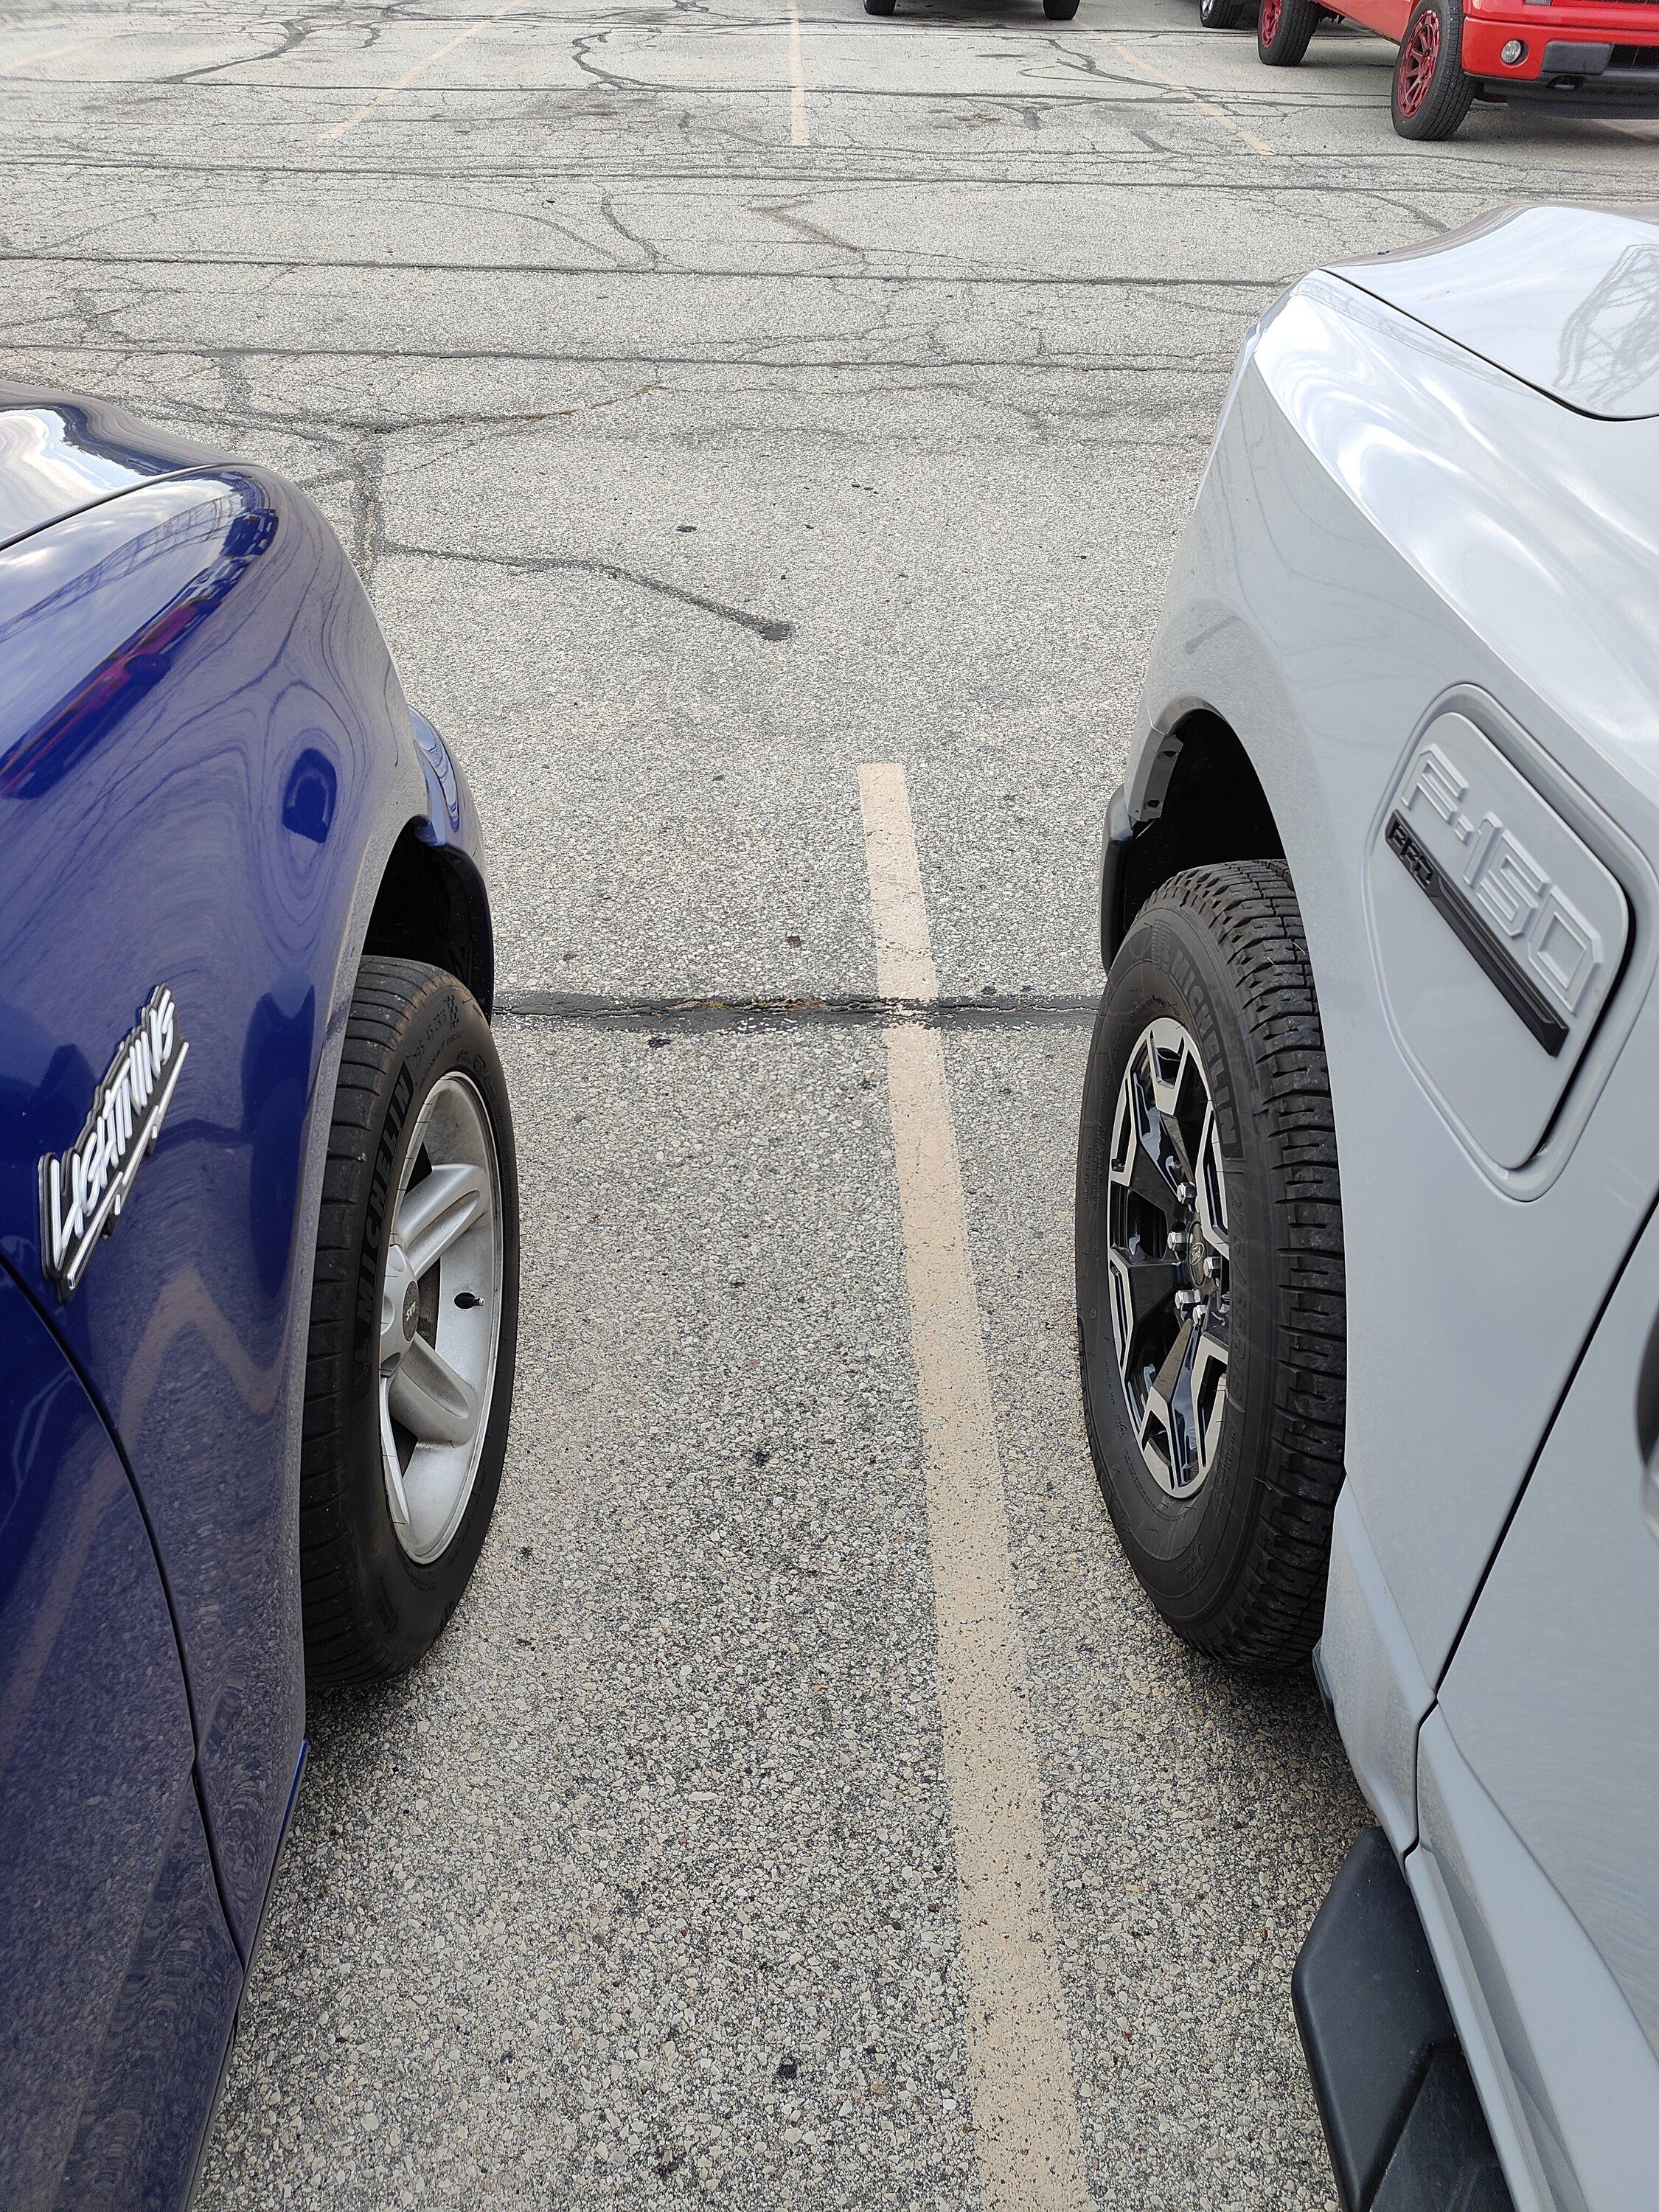 Ford F-150 Lightning 【BestEvMod】Let’s do a giveaway raffle on our Mud Flap! IMG20231006091429